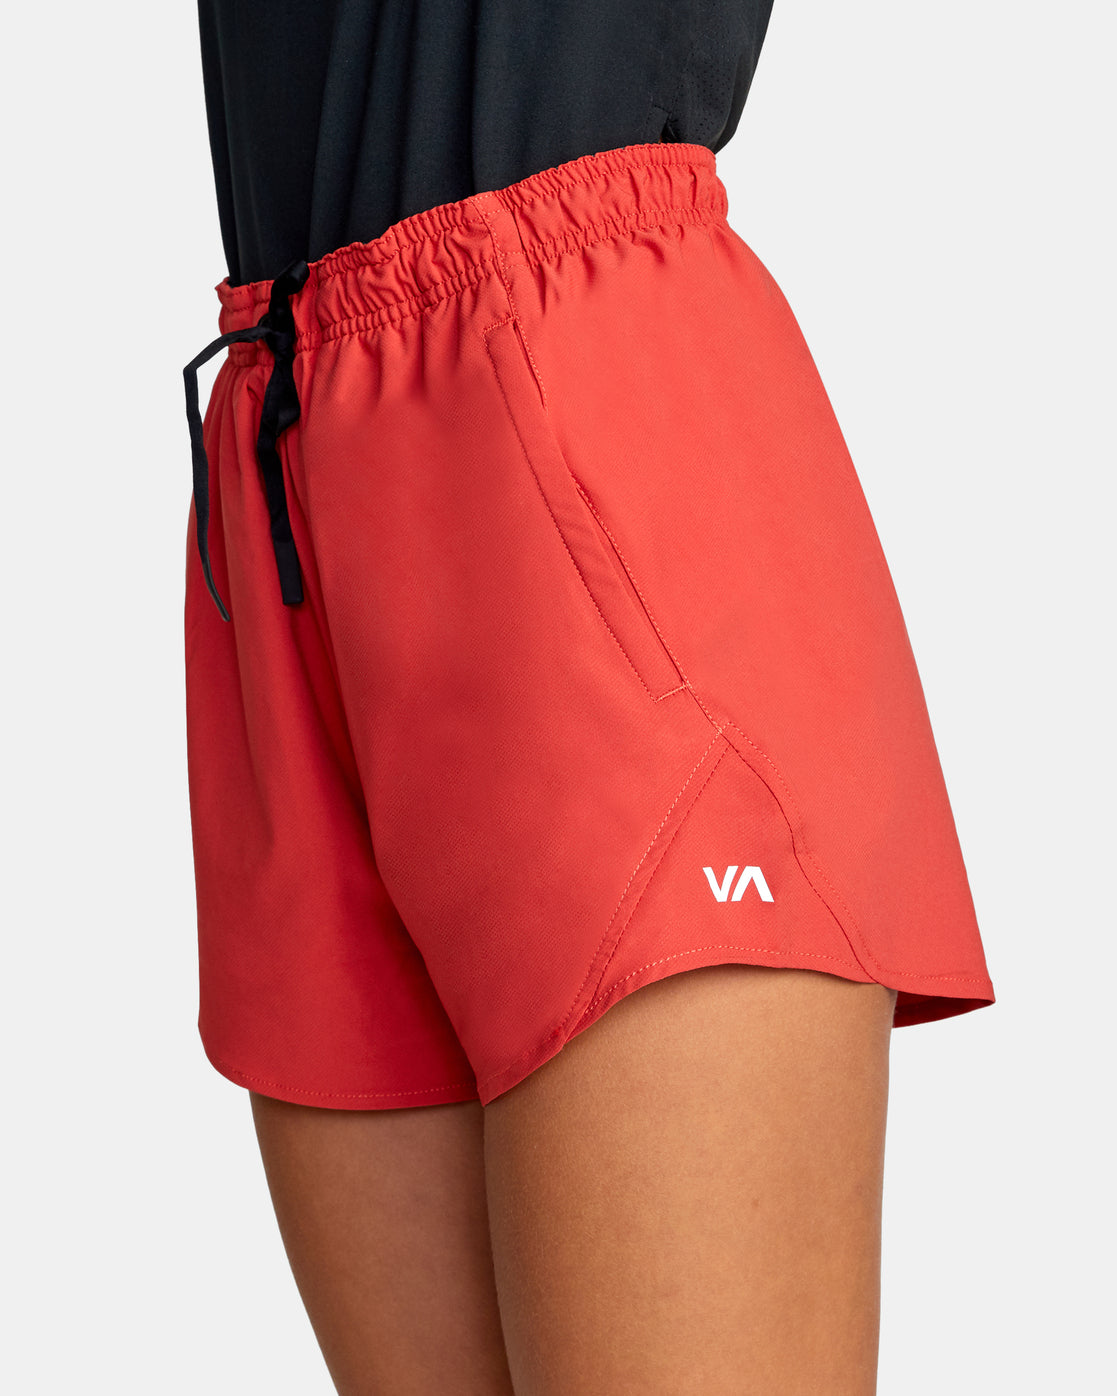 Women's Athletic Shorts in Red